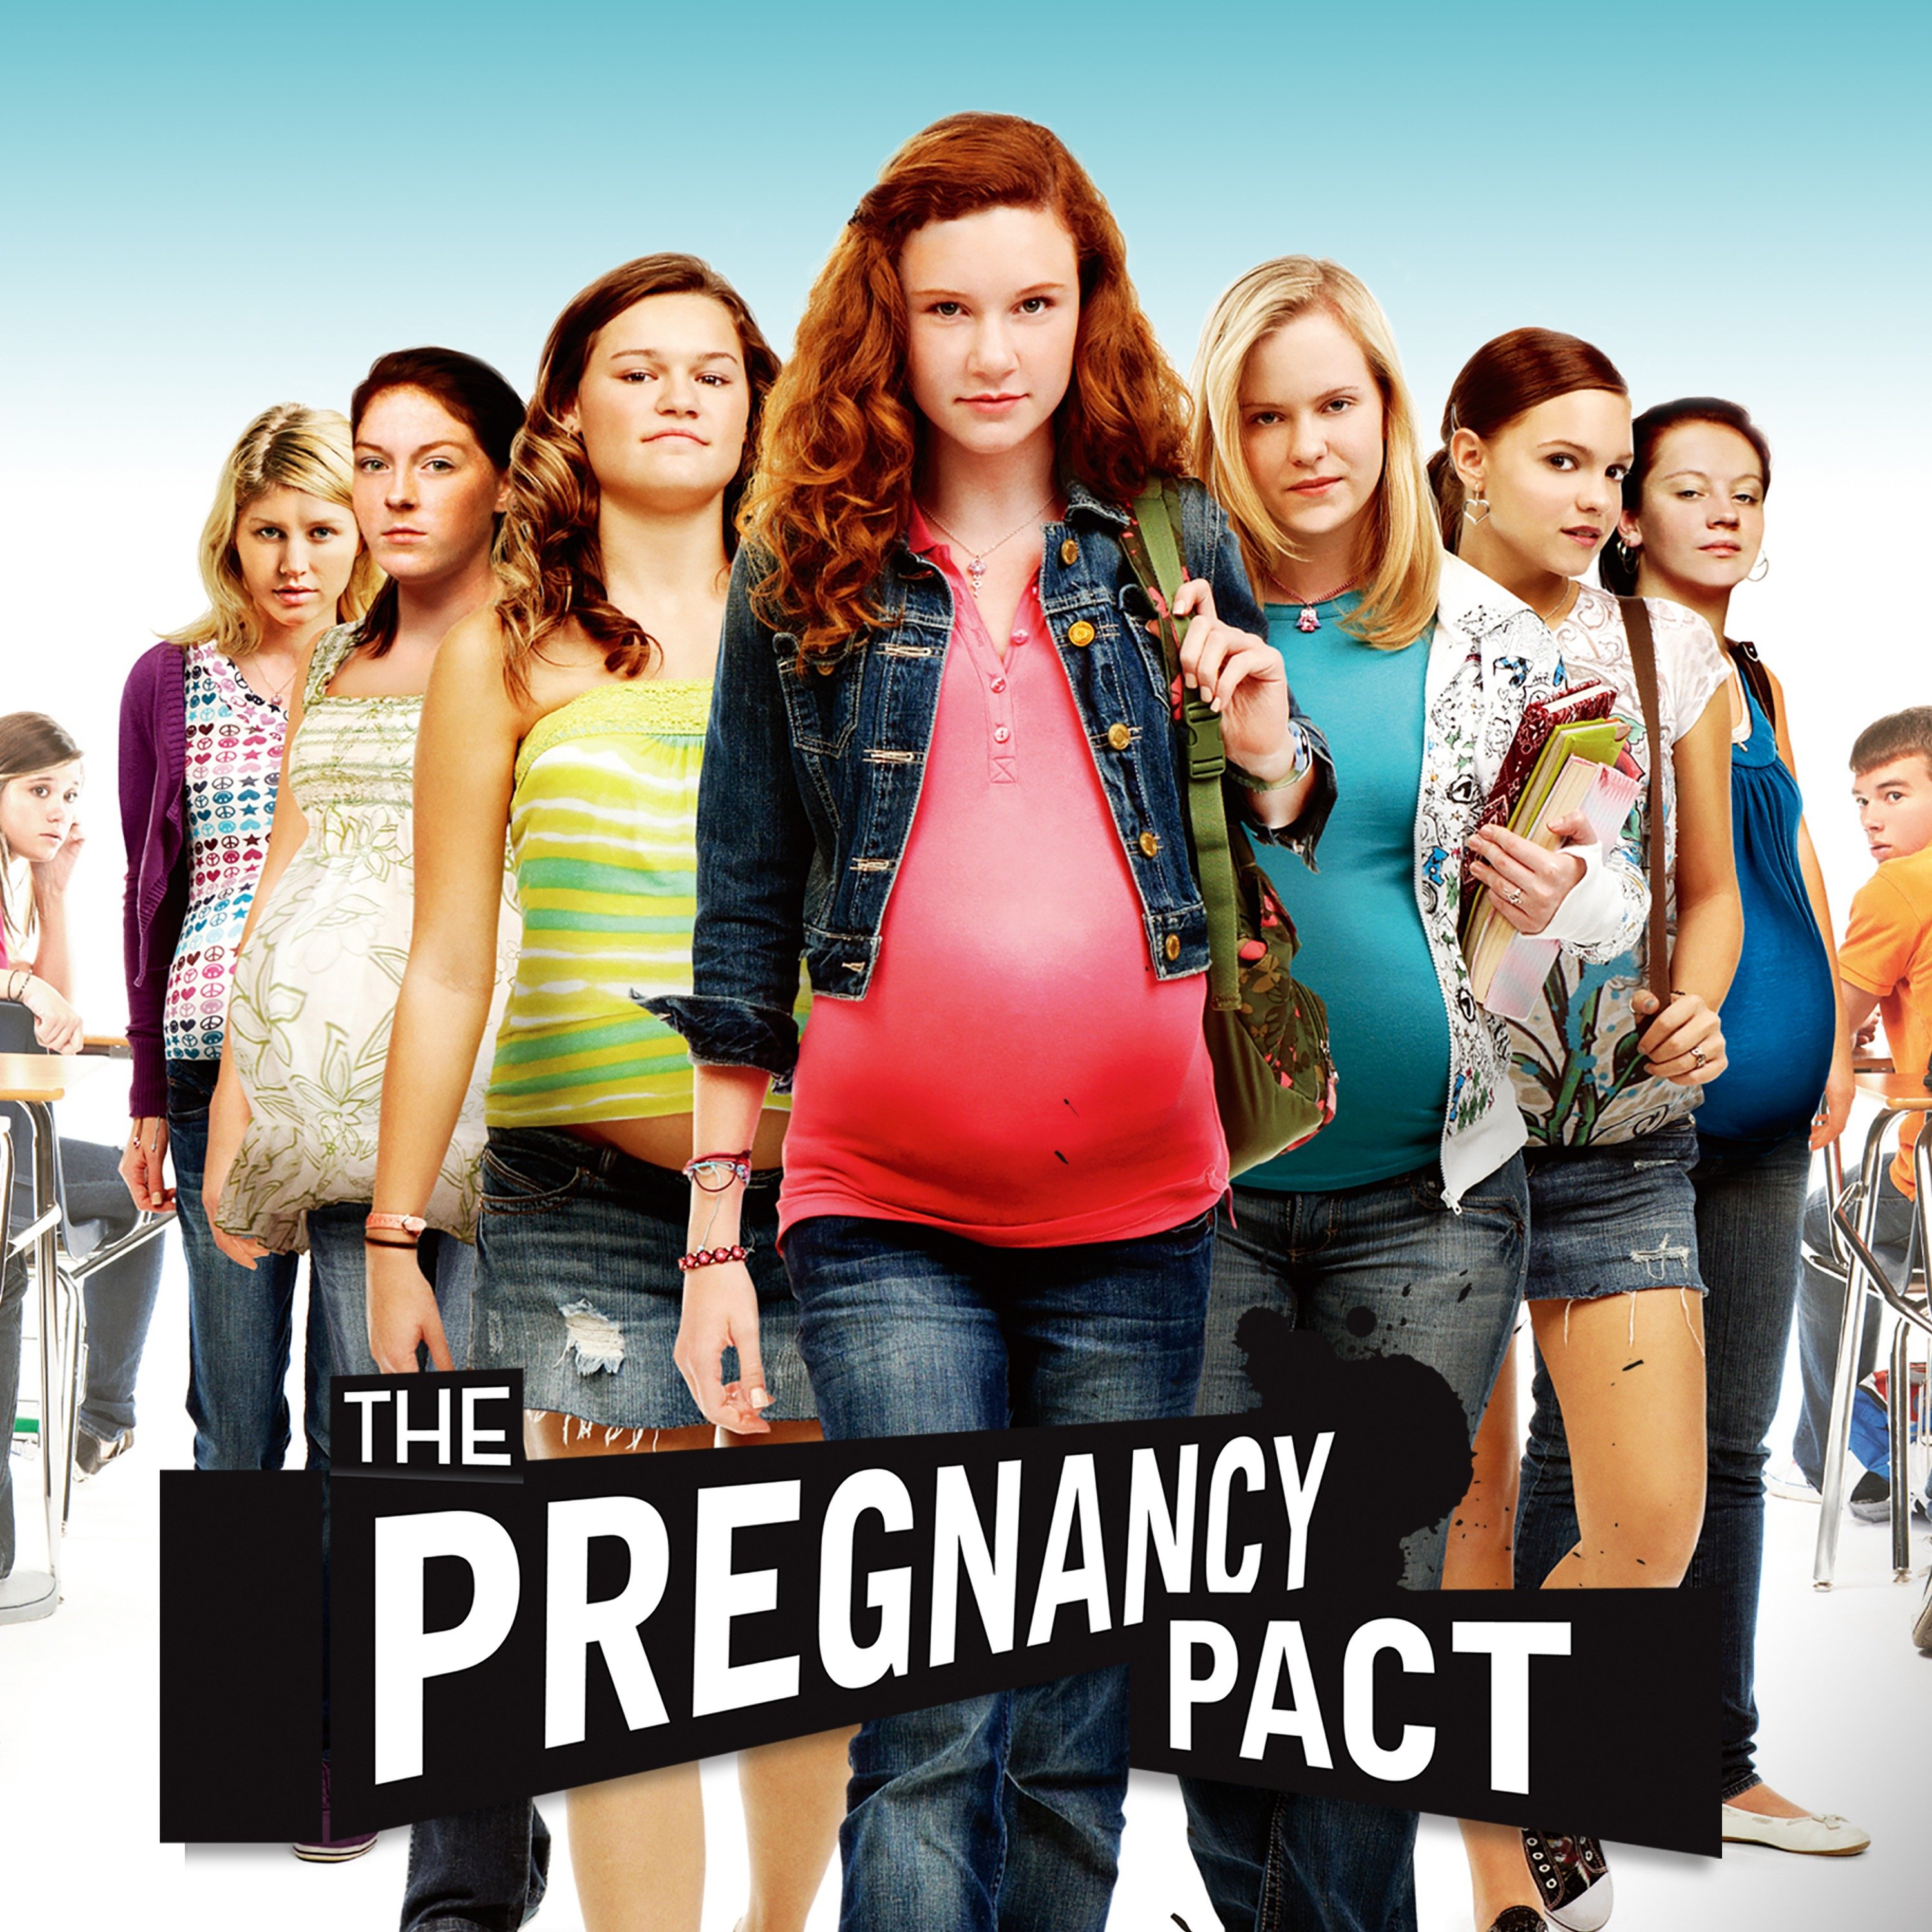 dontae little recommends pregnancy pact full movie pic